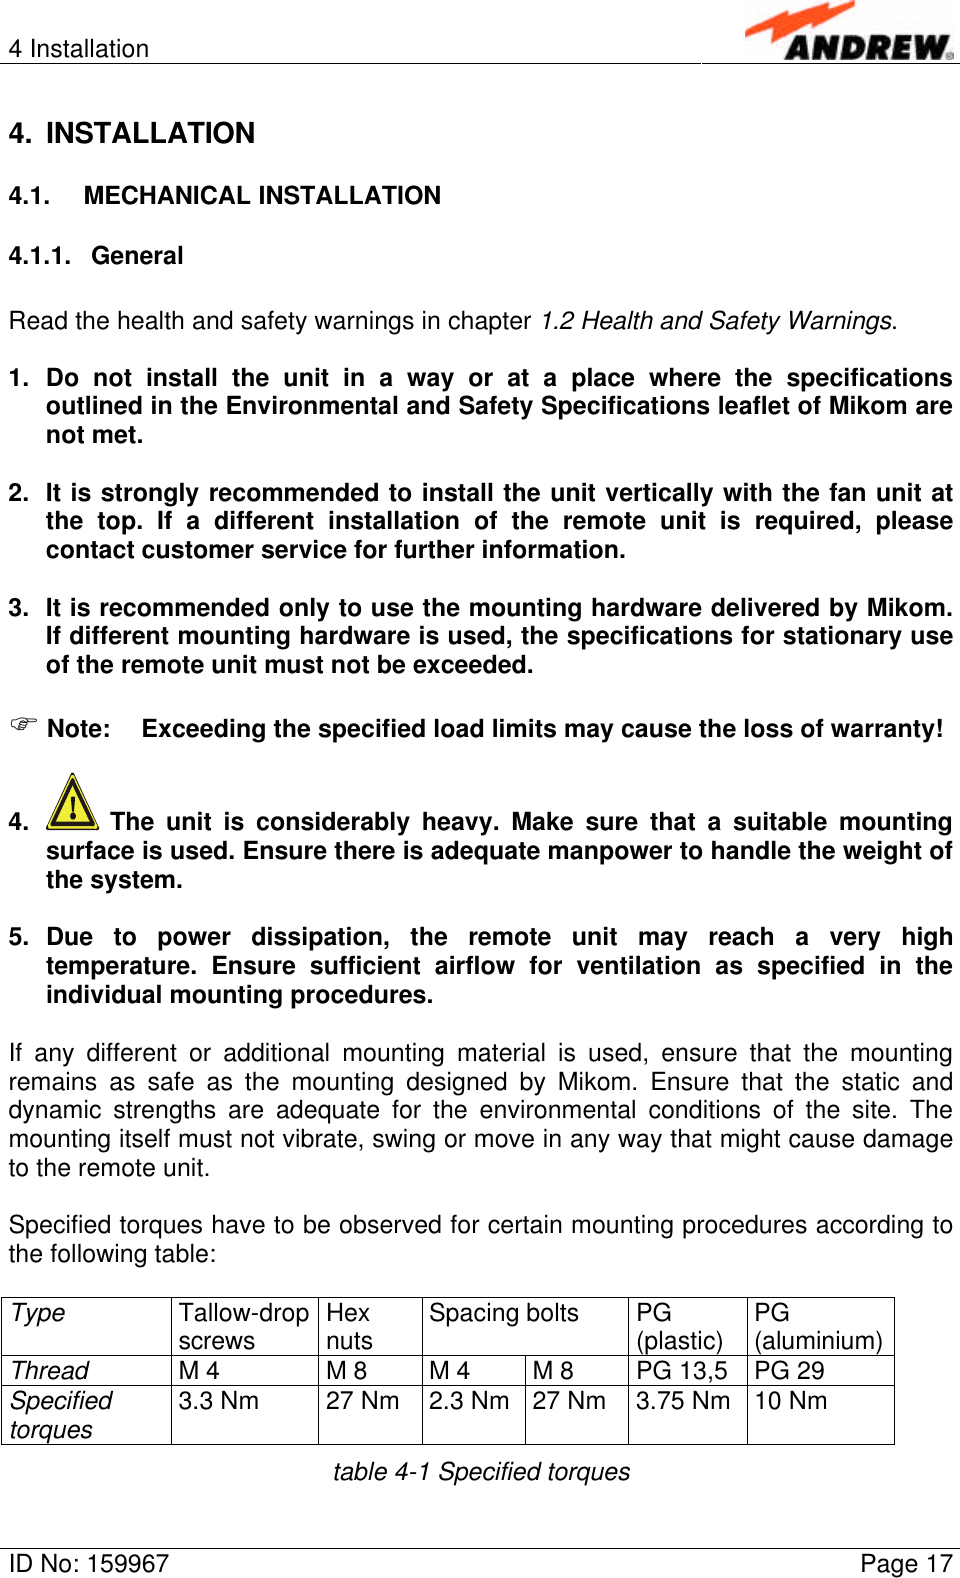 4 InstallationID No: 159967 Page 174. INSTALLATION4.1. MECHANICAL INSTALLATION4.1.1. GeneralRead the health and safety warnings in chapter 1.2 Health and Safety Warnings.1. Do not install the unit in a way or at a place where the specificationsoutlined in the Environmental and Safety Specifications leaflet of Mikom arenot met.2. It is strongly recommended to install the unit vertically with the fan unit atthe top. If a different installation of the remote unit is required, pleasecontact customer service for further information.3. It is recommended only to use the mounting hardware delivered by Mikom.If different mounting hardware is used, the specifications for stationary useof the remote unit must not be exceeded.F Note: Exceeding the specified load limits may cause the loss of warranty!4.  The unit is considerably heavy. Make sure that a suitable mountingsurface is used. Ensure there is adequate manpower to handle the weight ofthe system.5. Due to power dissipation, the remote unit may reach a very hightemperature. Ensure sufficient airflow for ventilation as specified in theindividual mounting procedures.If any different or additional mounting material is used, ensure that the mountingremains as safe as the mounting designed by Mikom. Ensure that the static anddynamic strengths are adequate for the environmental conditions of the site. Themounting itself must not vibrate, swing or move in any way that might cause damageto the remote unit.Specified torques have to be observed for certain mounting procedures according tothe following table:Type Tallow-dropscrews Hexnuts Spacing bolts PG(plastic) PG(aluminium)Thread M 4 M 8 M 4 M 8 PG 13,5 PG 29Specifiedtorques 3.3 Nm 27 Nm 2.3 Nm 27 Nm 3.75 Nm 10 Nmtable 4-1 Specified torques